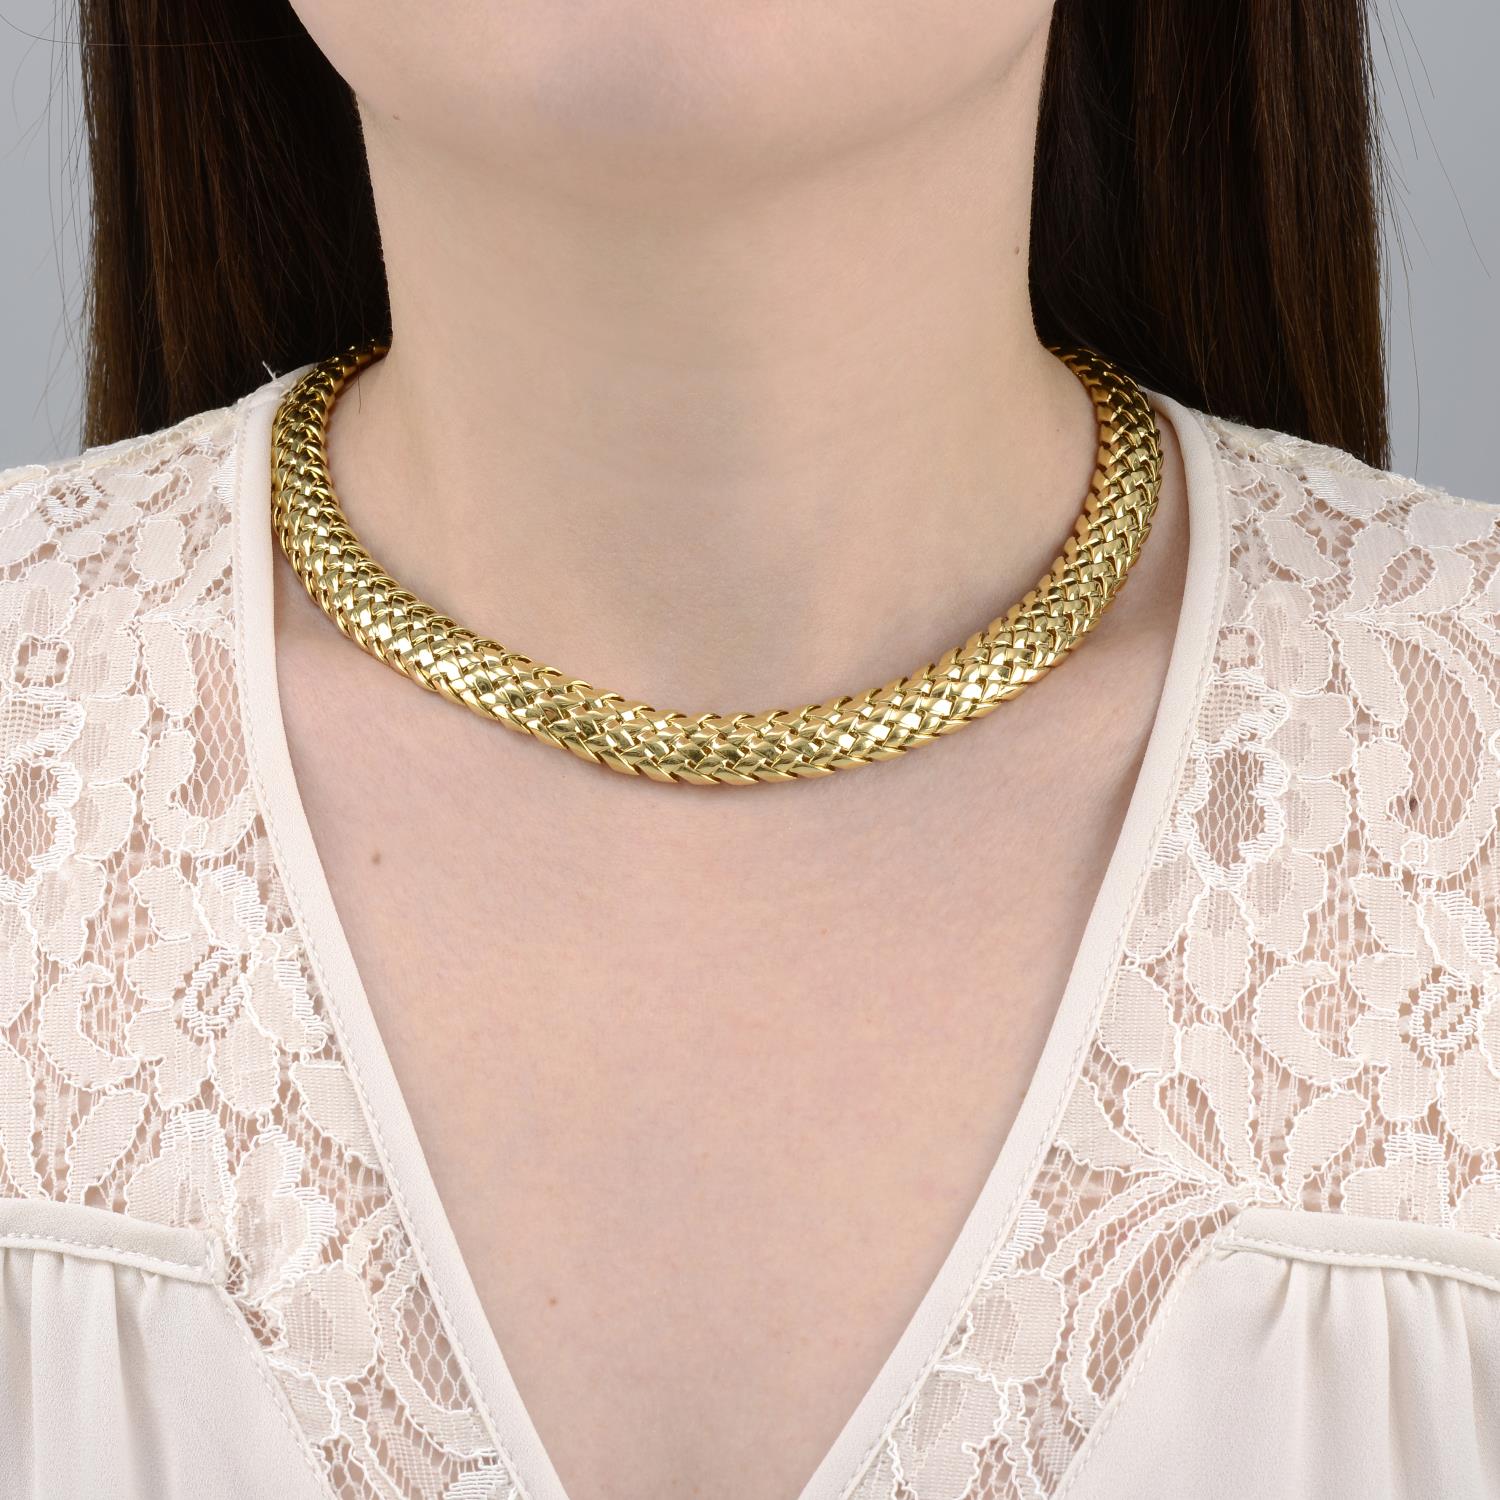 An 18ct gold 'Vannerie' collar necklace, by Tiffany & Co. - Image 3 of 5